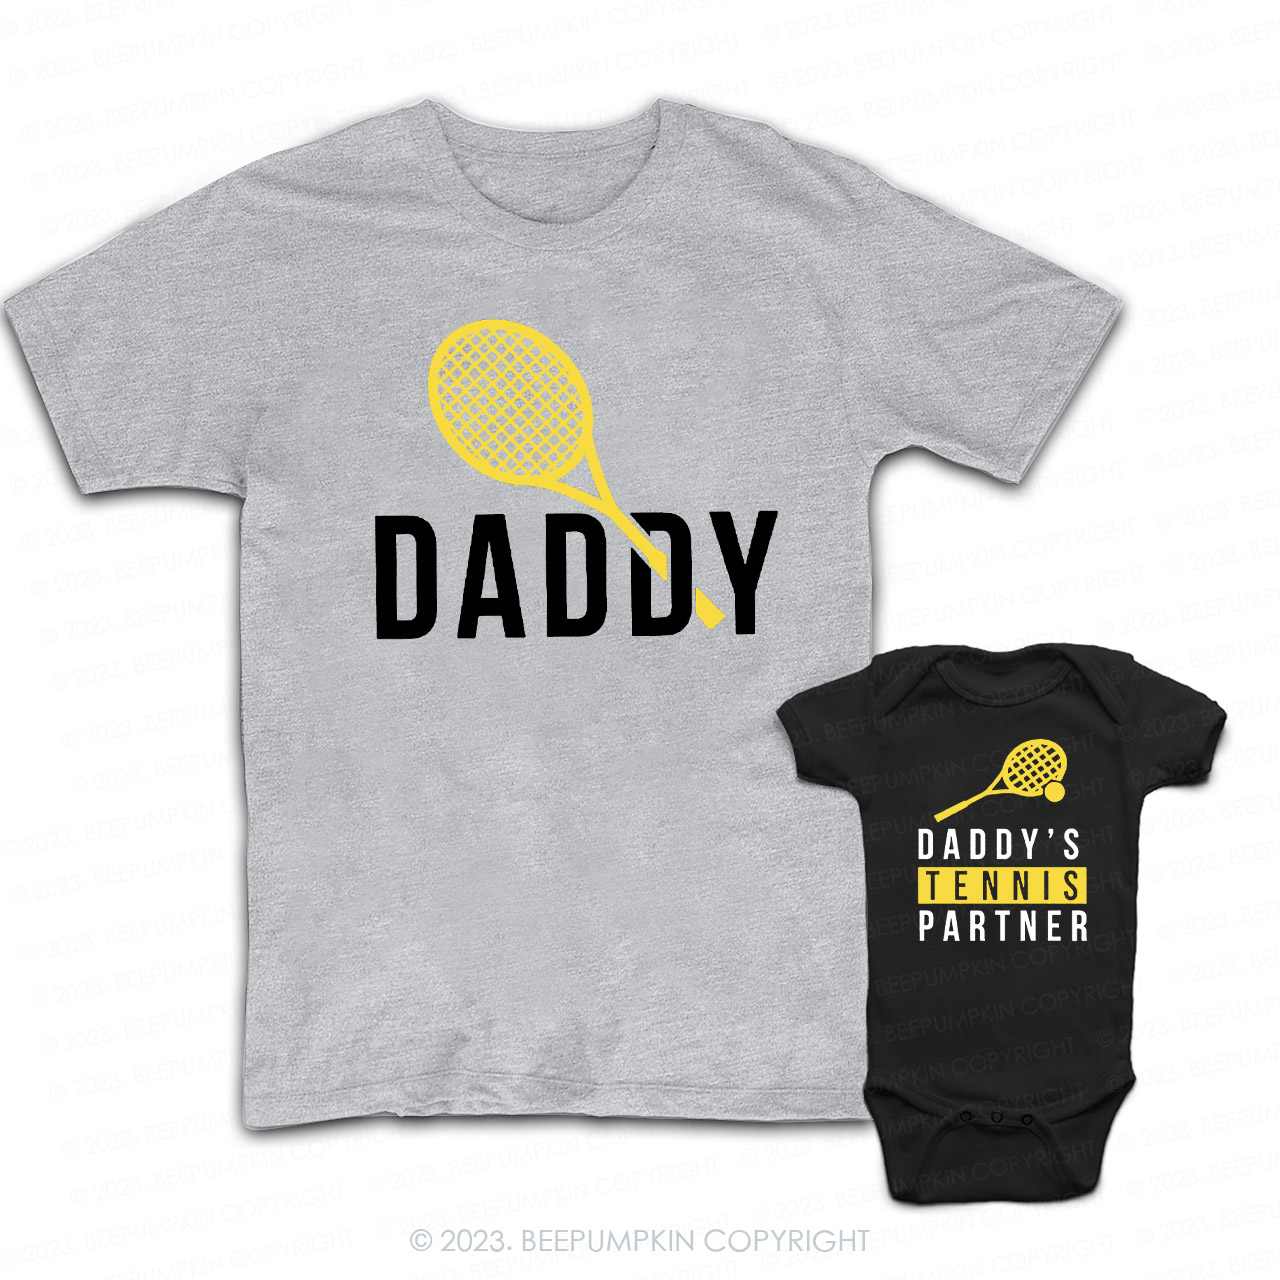 Daddy And Daddy's Tennis Partner Matching T-Shirts For Dad&Me